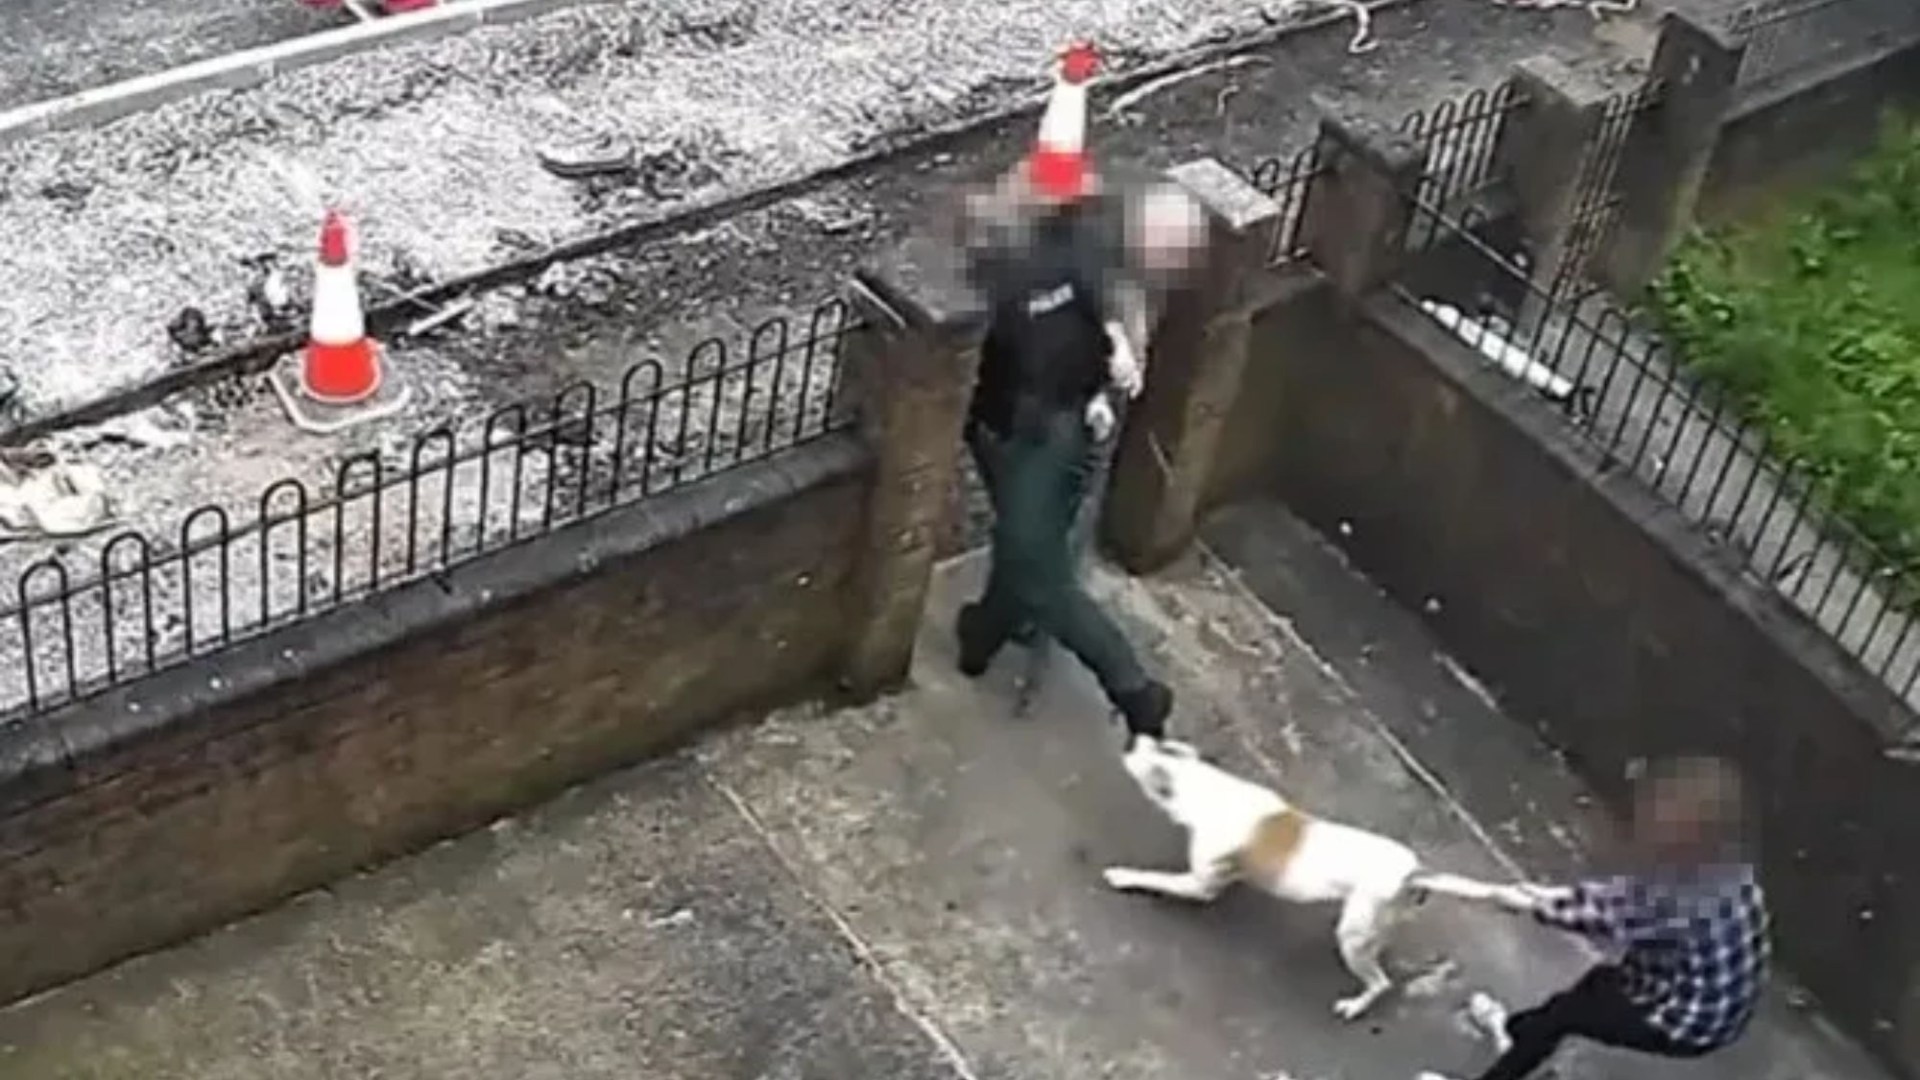 Horror moment XL Bully attacks cop as dog ‘latches onto her boot’ causing injuries and major probe launched [Video]